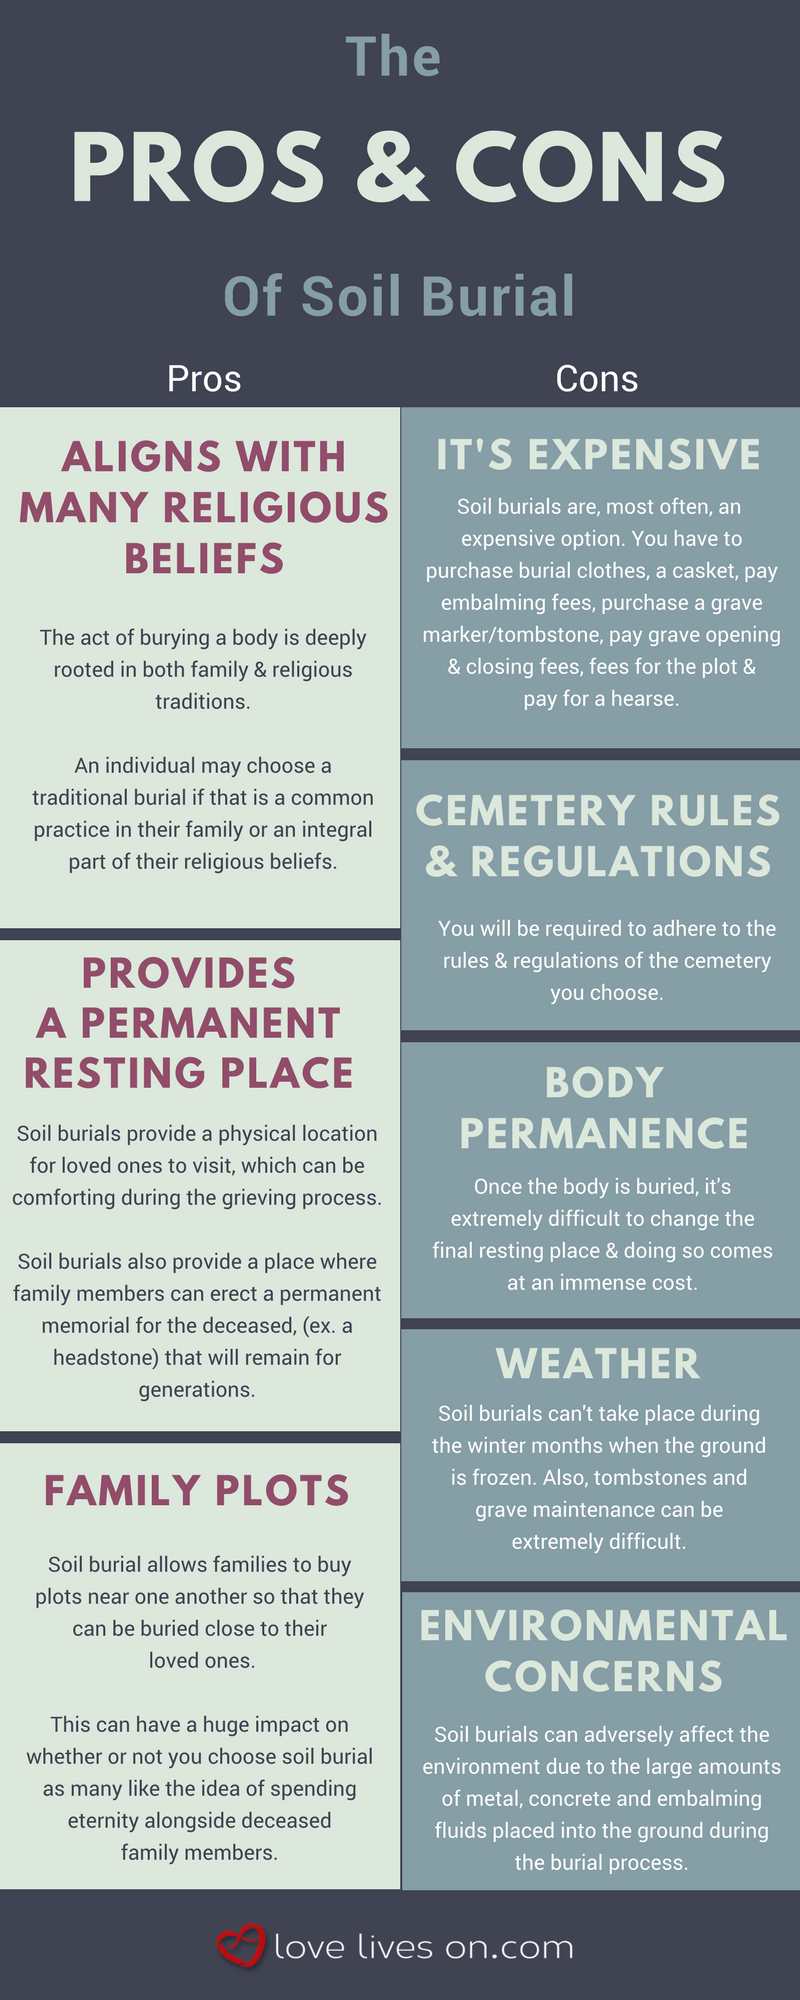 Infographic: The Pros & Cons of Soil Burial